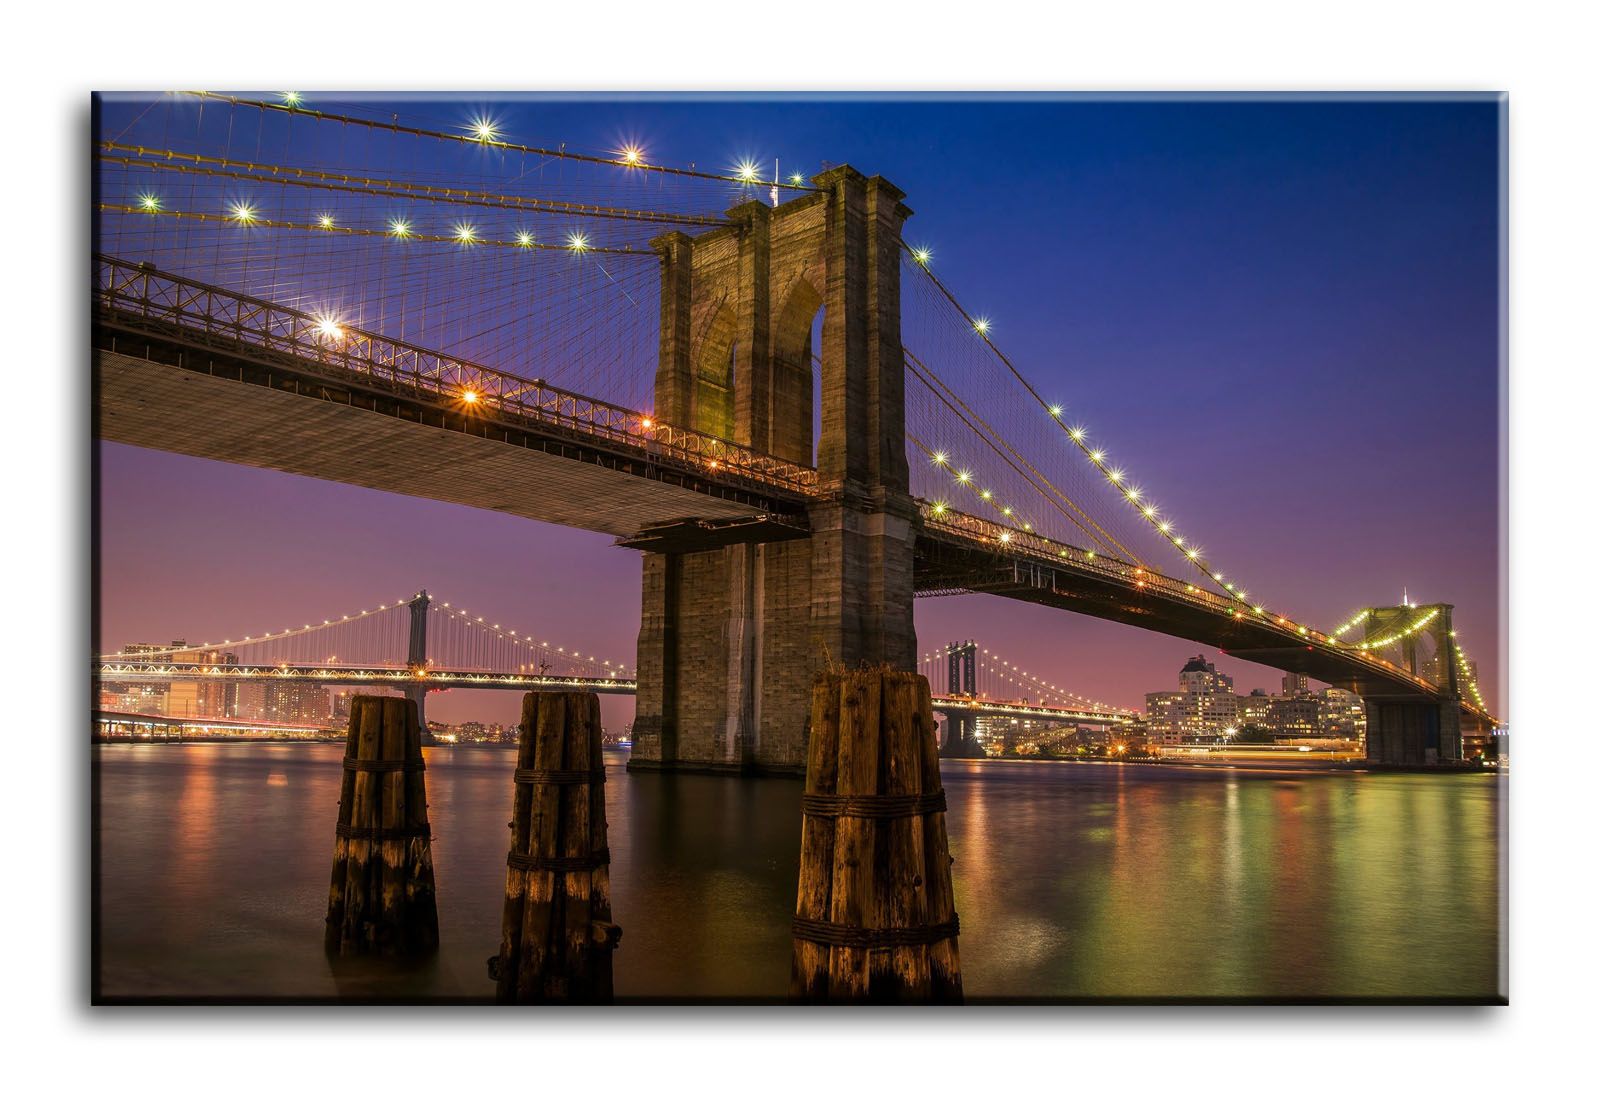 Large Wall Art Canvas Picture Print Of Brooklyn Bridge Light Framed | Ebay Pertaining To Most Recently Released Bridge Wall Art (View 1 of 20)